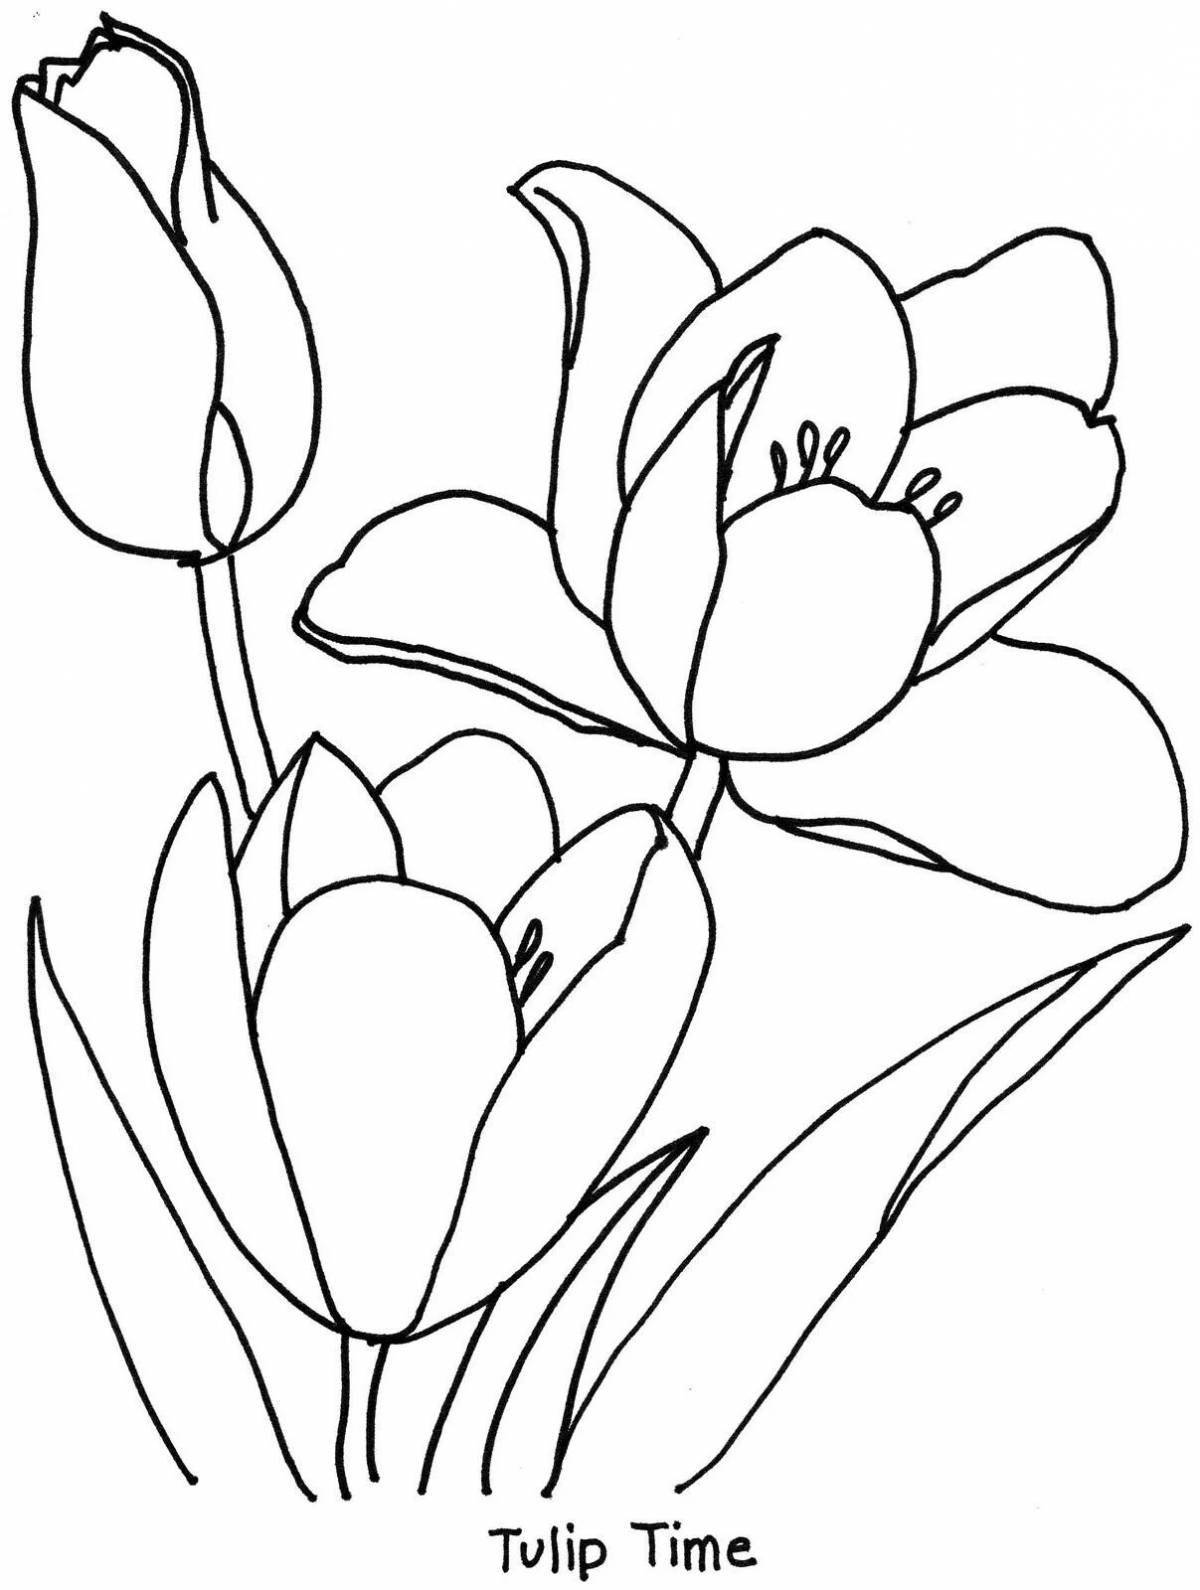 Coloring page charming tulip